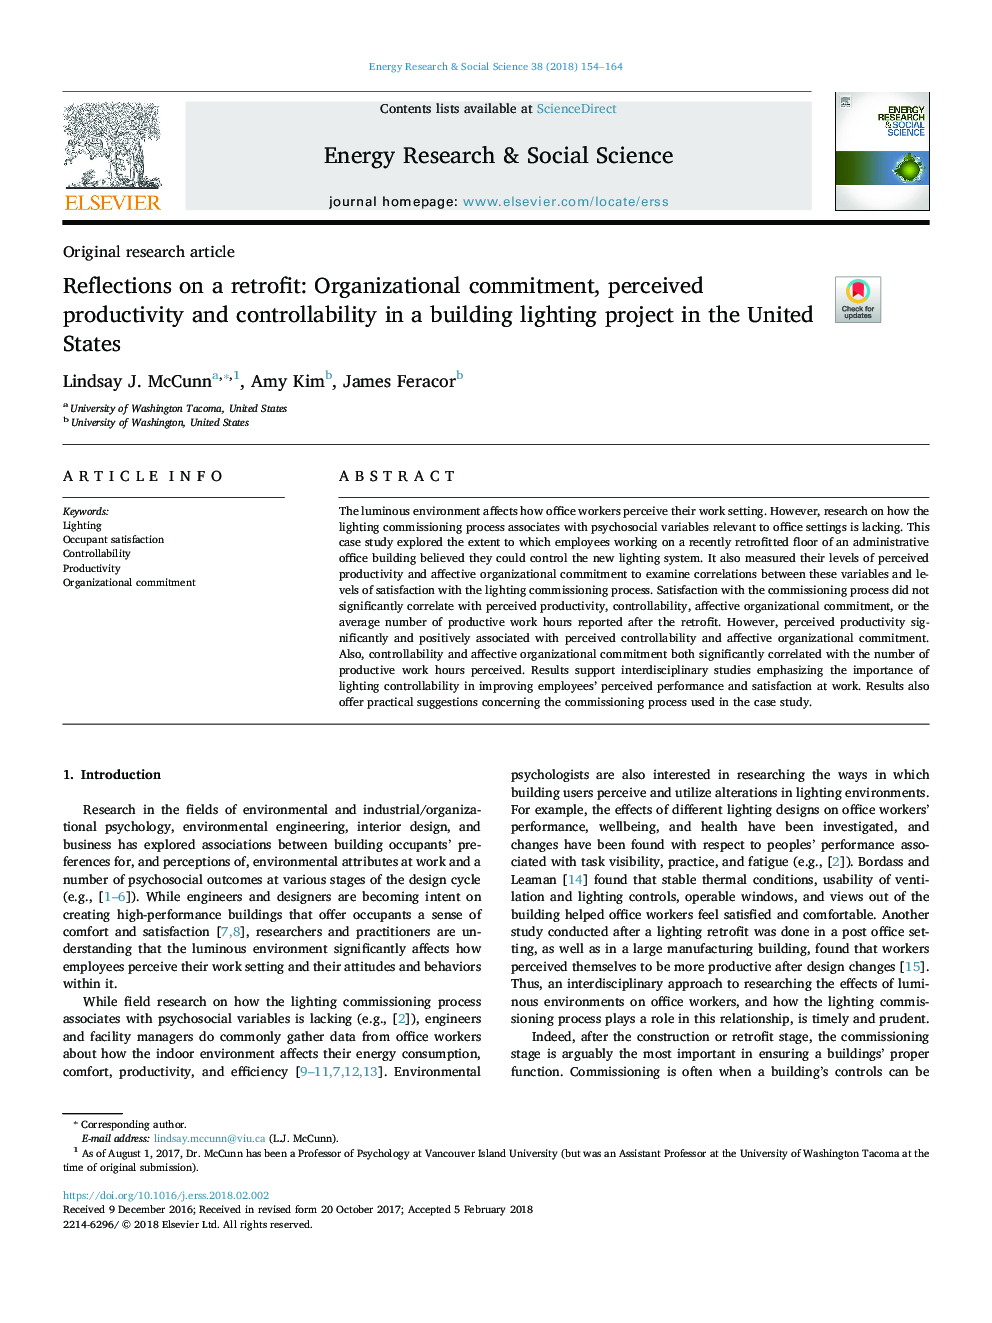 Reflections on a retrofit: Organizational commitment, perceived productivity and controllability in a building lighting project in the United States